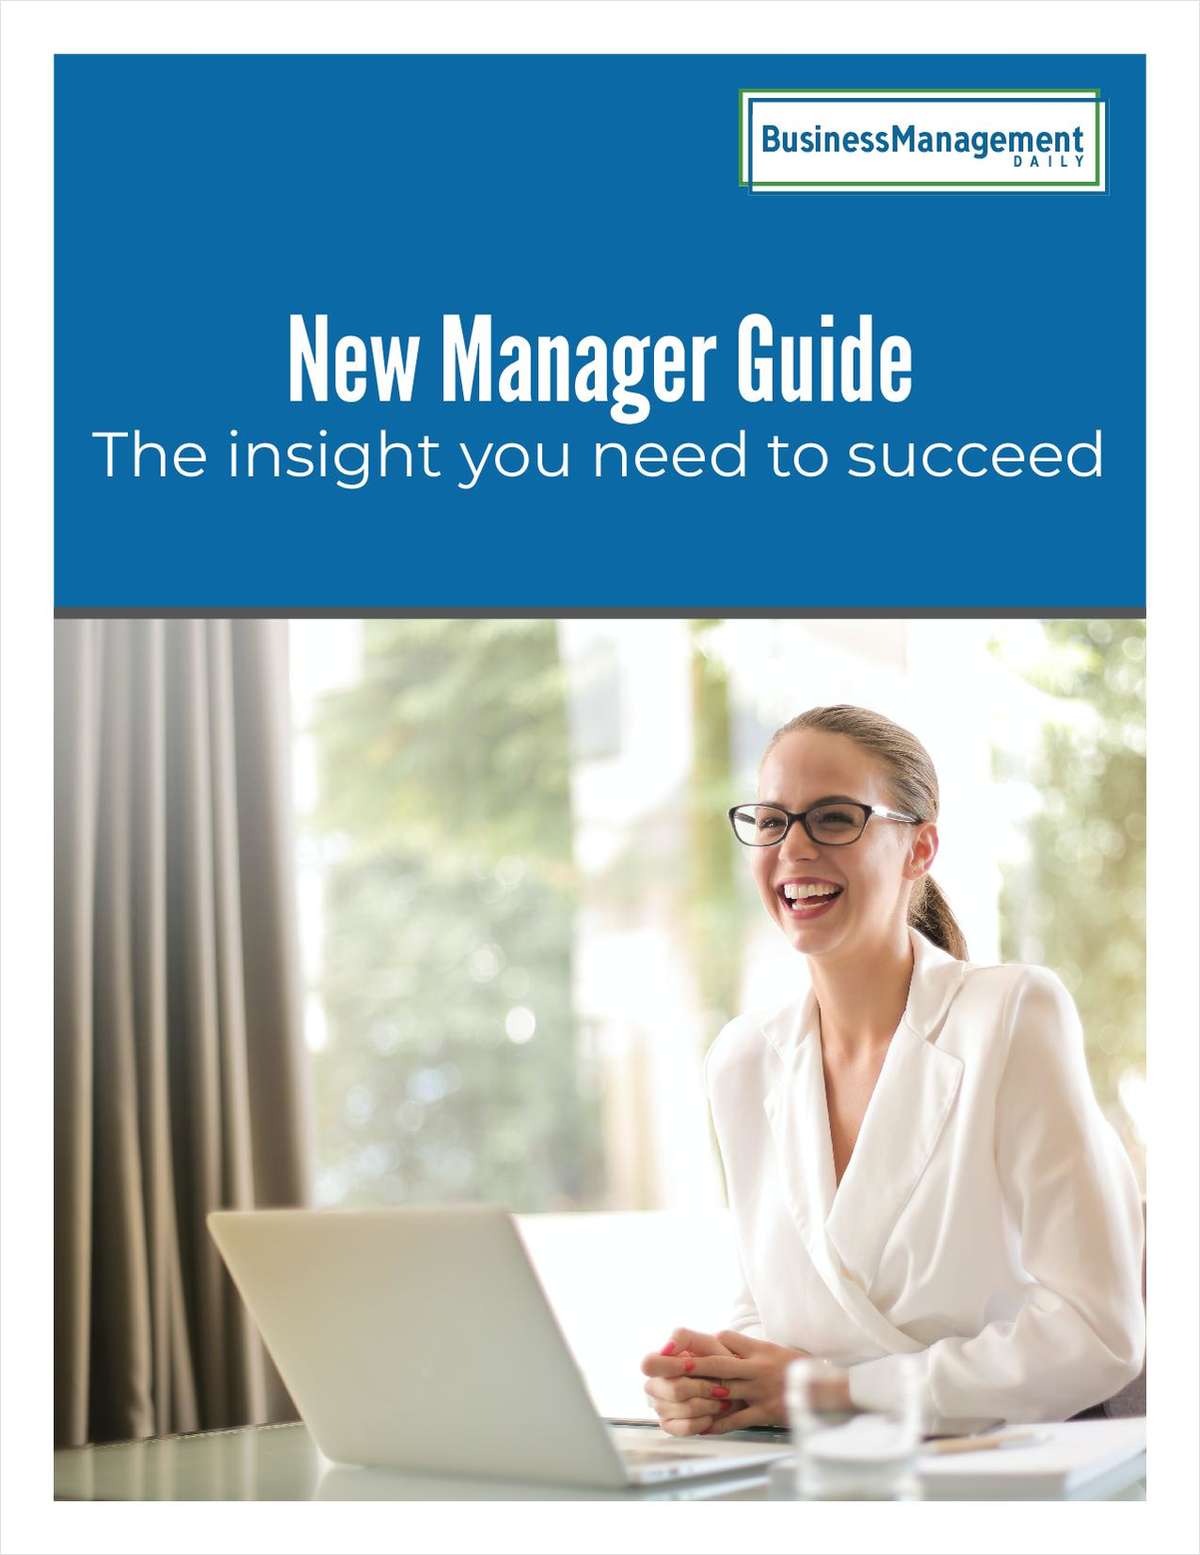 New Manager Guide: The insight you need to succeed